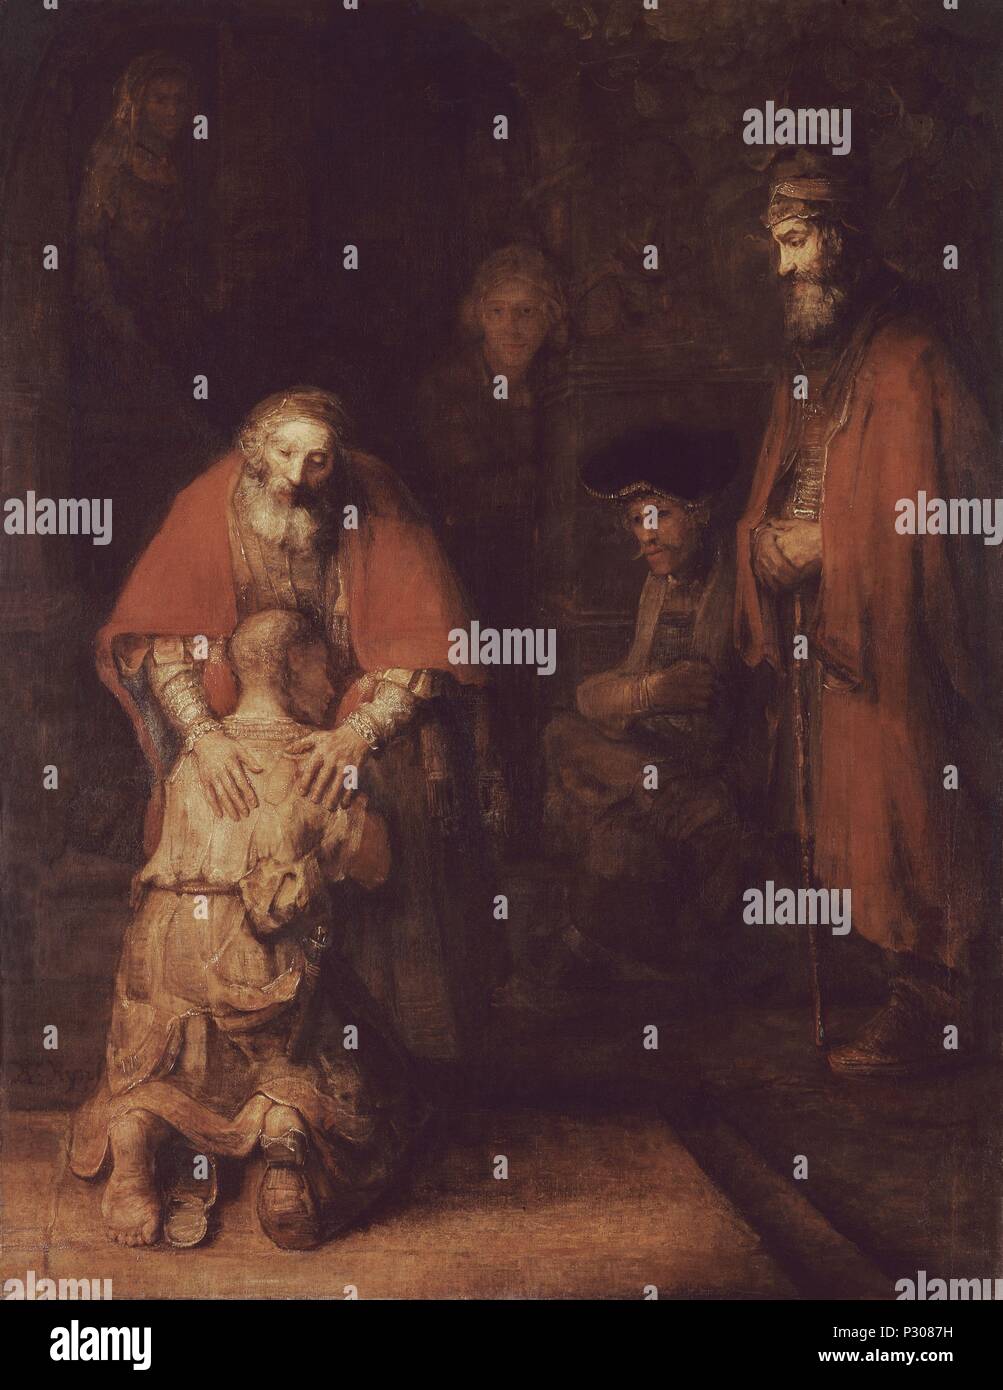 Dutch school. The Return of the Prodigal Son. 17th century. Saint-Petersburg, Hermitage Museum. Author: Rembrandt (1606-1669). Location: MUSEO ERMITAGE-COLECCION, ST. PETERSBURG, RUSSIA. Stock Photo